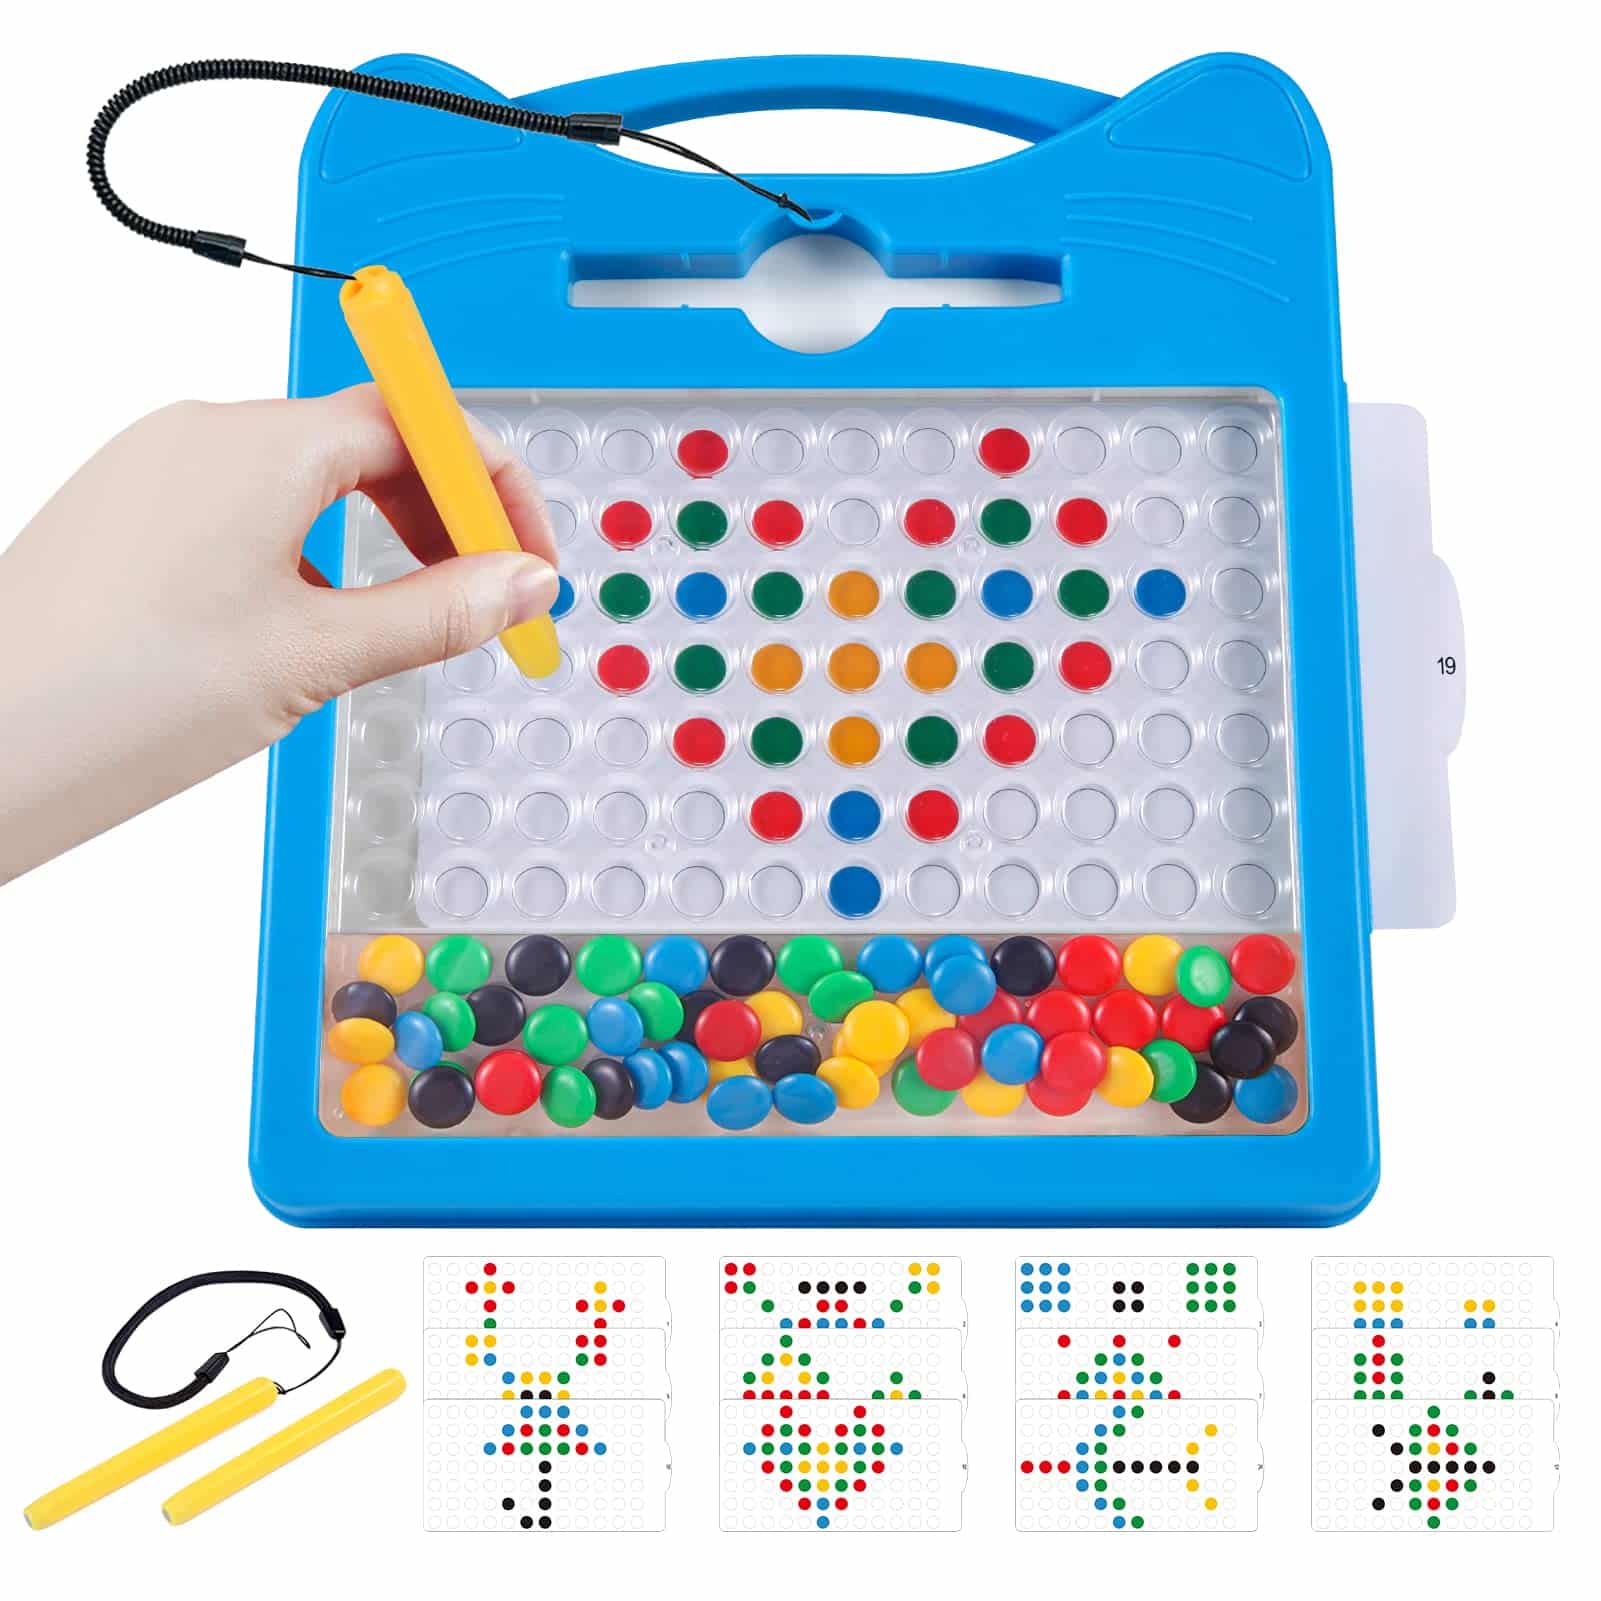 Svance Magnetic Drawing Board For Kids